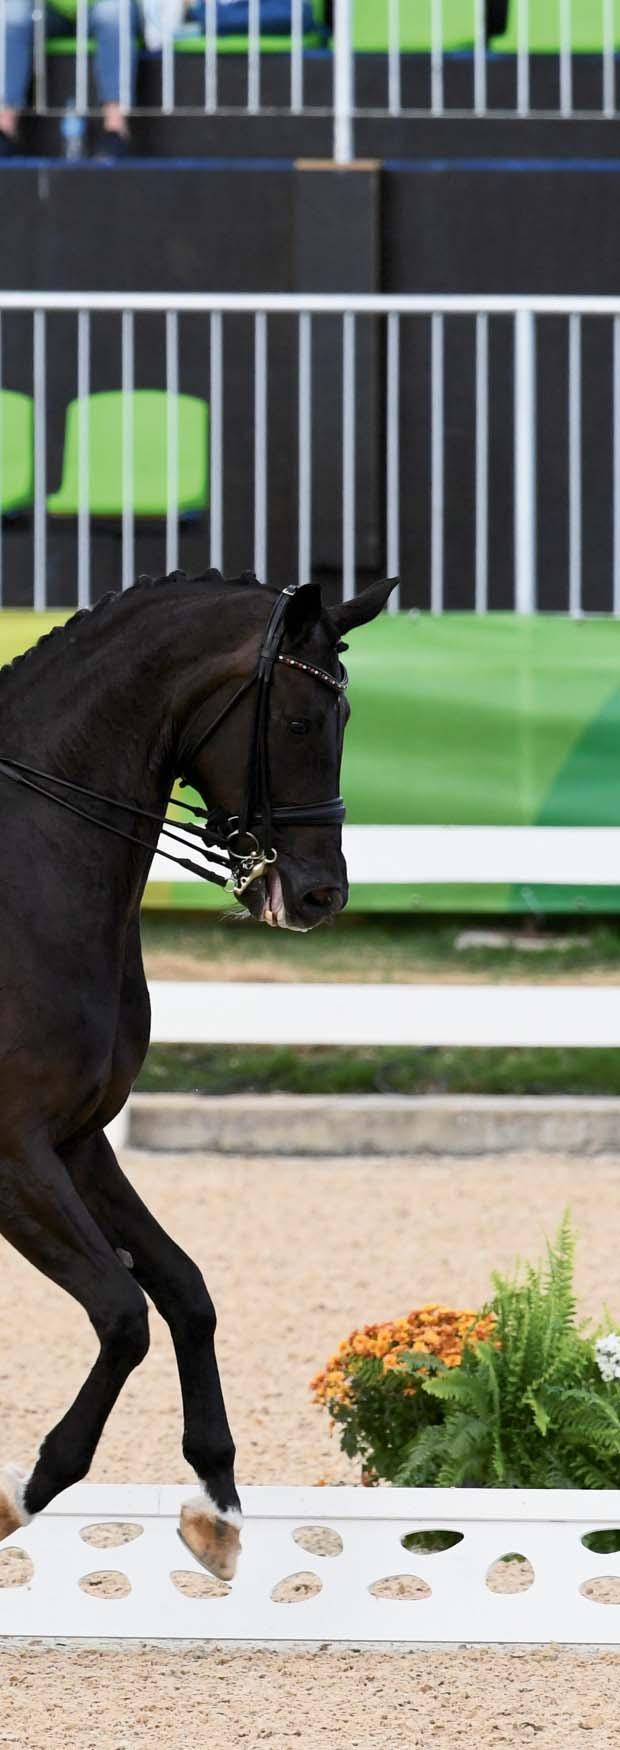 BRED FOR SUCCESS: The pedigree of the Rio dressage individual silver medalist, Weihegold OLD, contains proven bloodline crosses and producers DIANA DE ROSA In the belief that blood will tell,